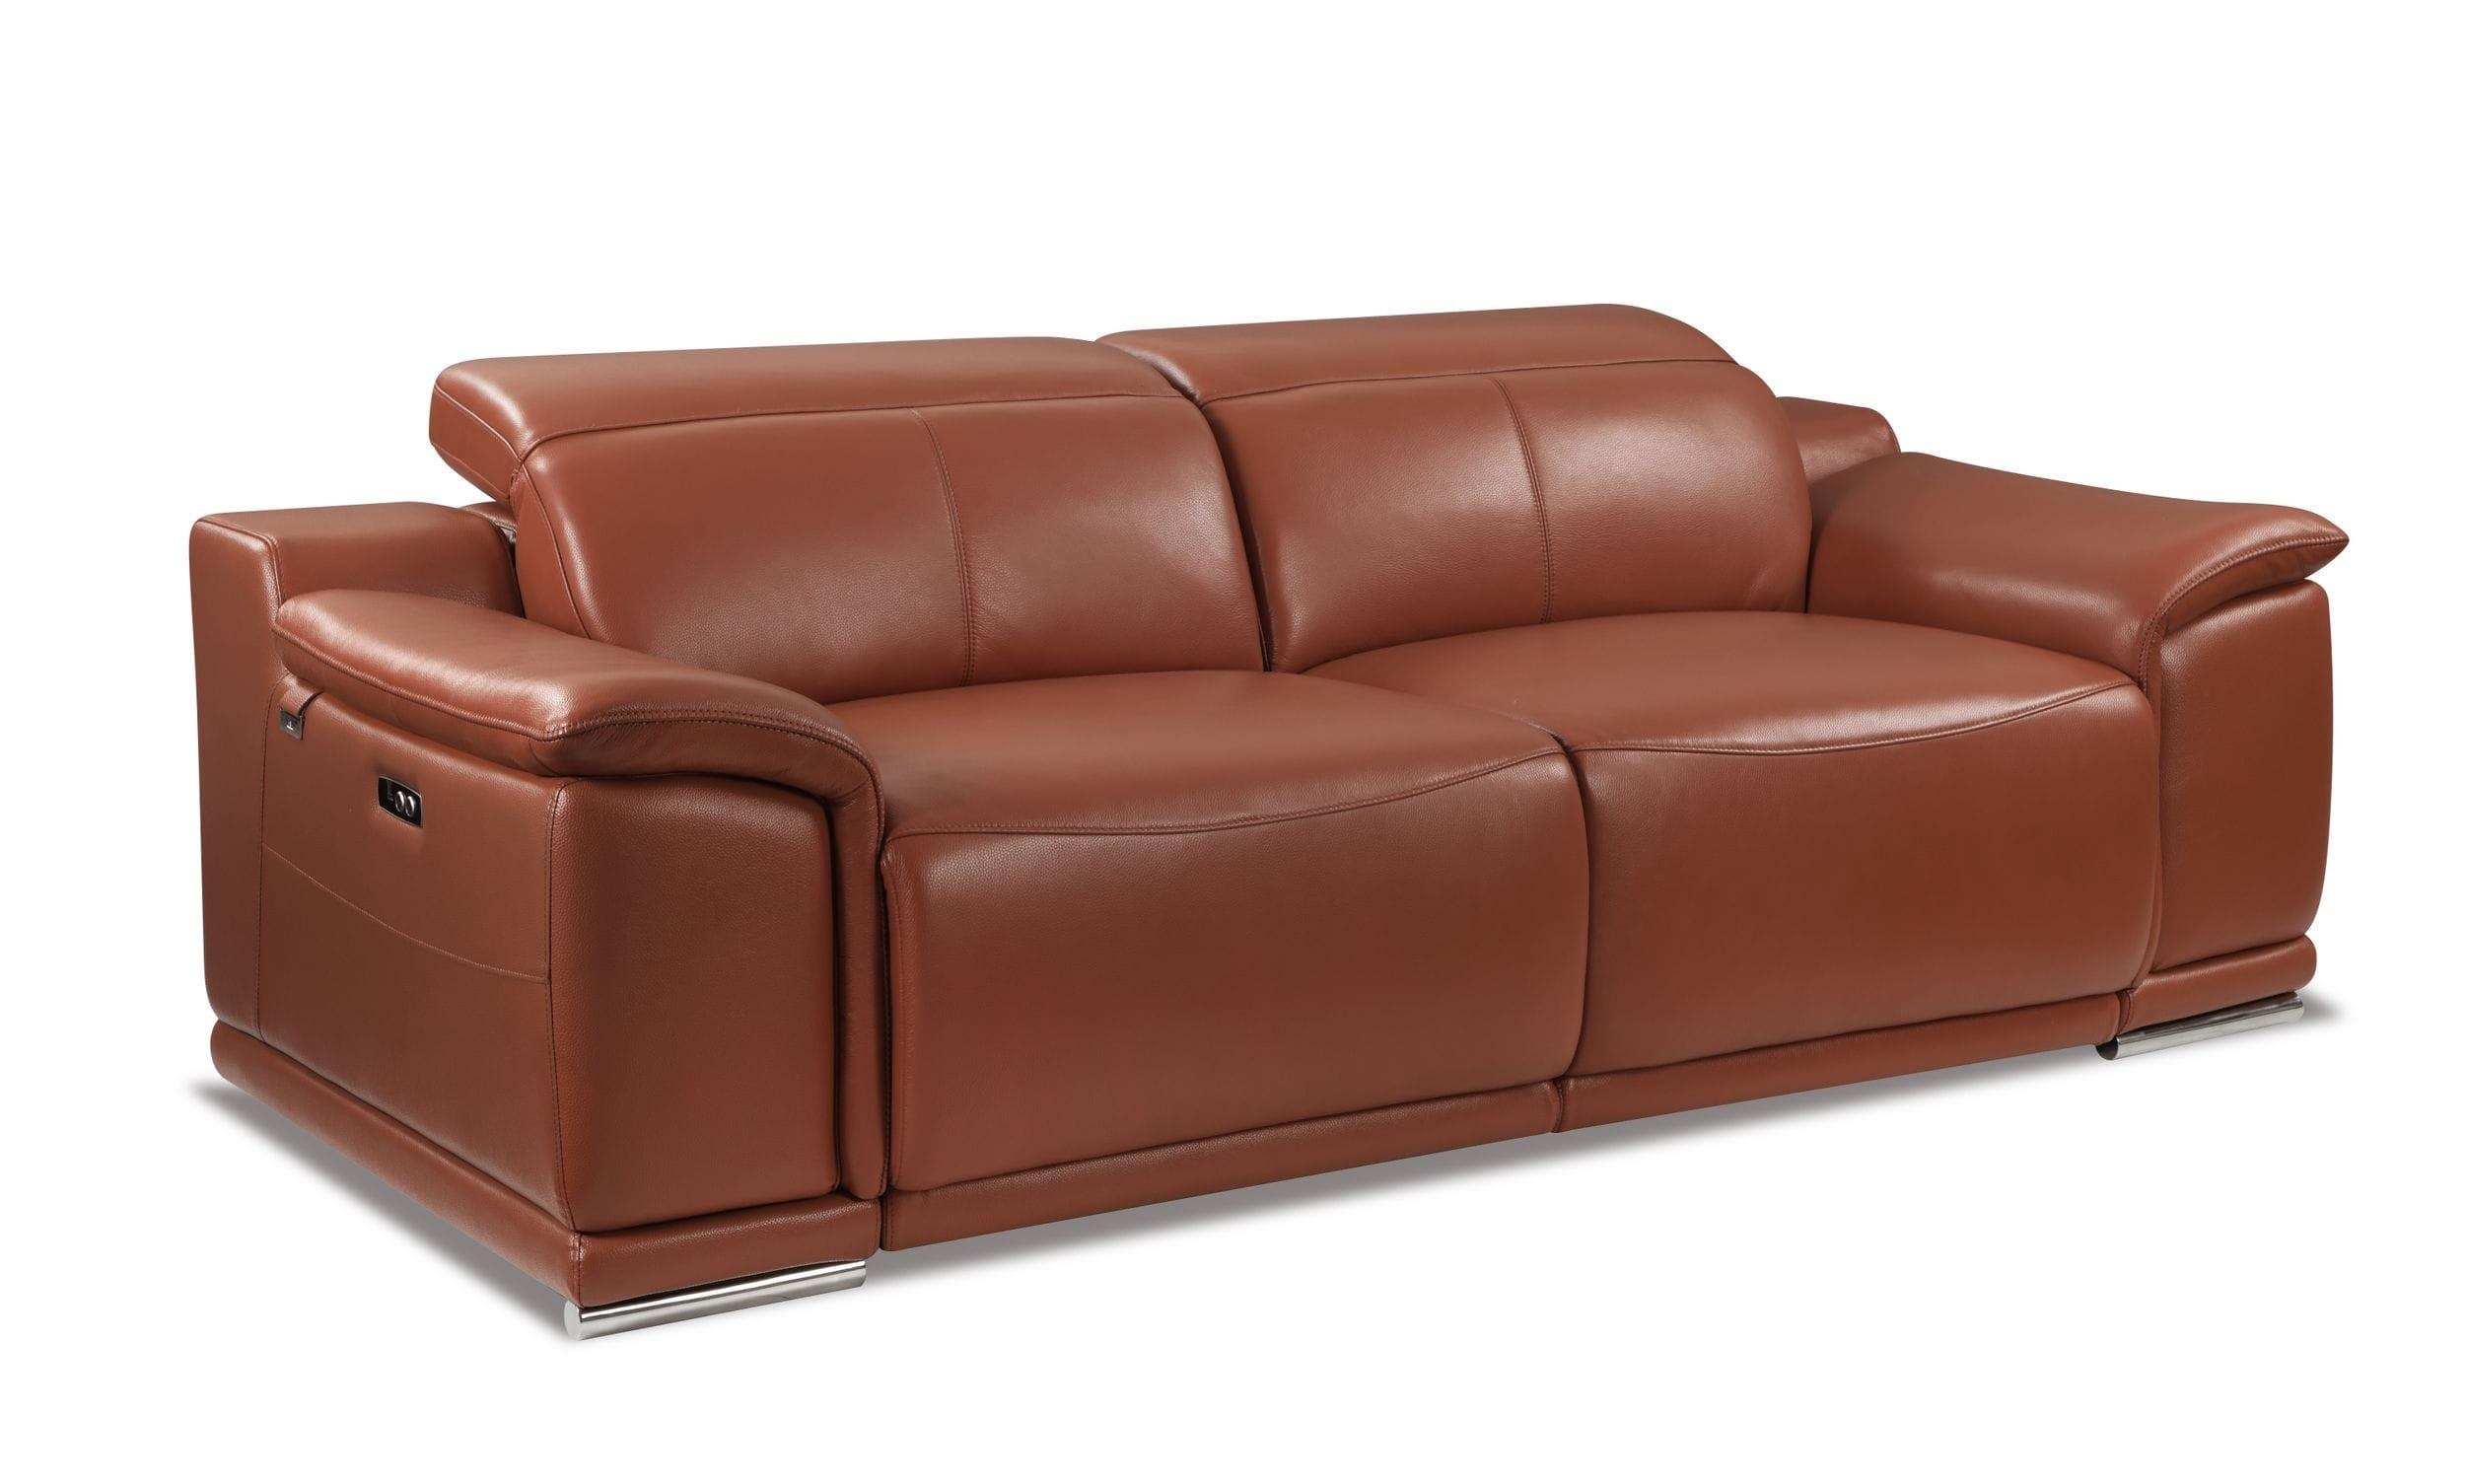 Contemporary Reclining Sofa 9762 9762-CAMEL-S in Camel Leather Match